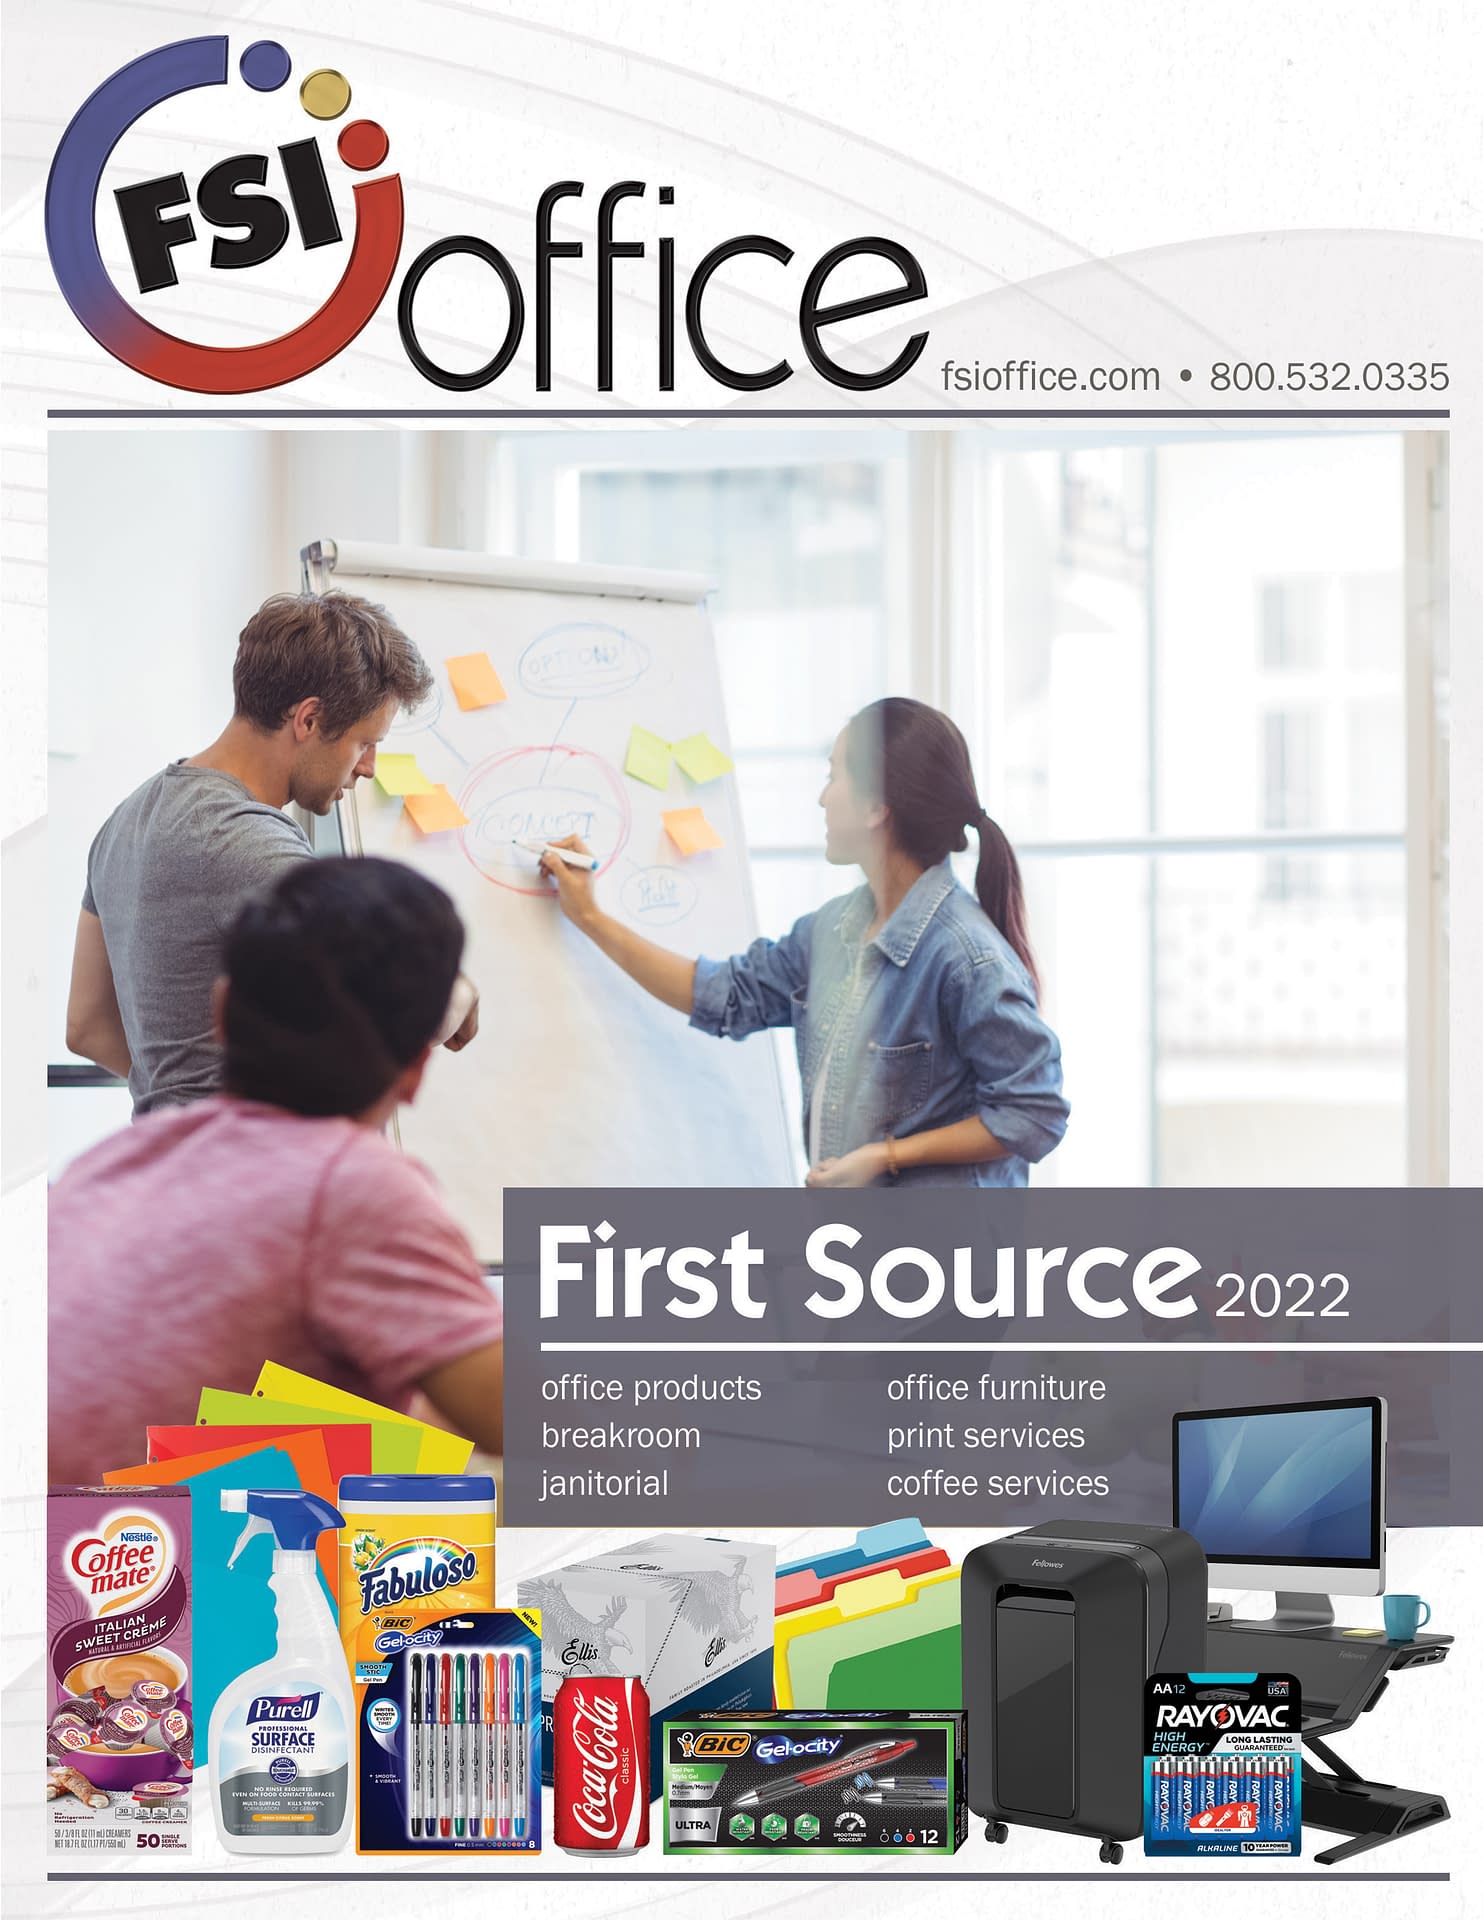 Catalogs, Deals & Promotions | FSIoffice